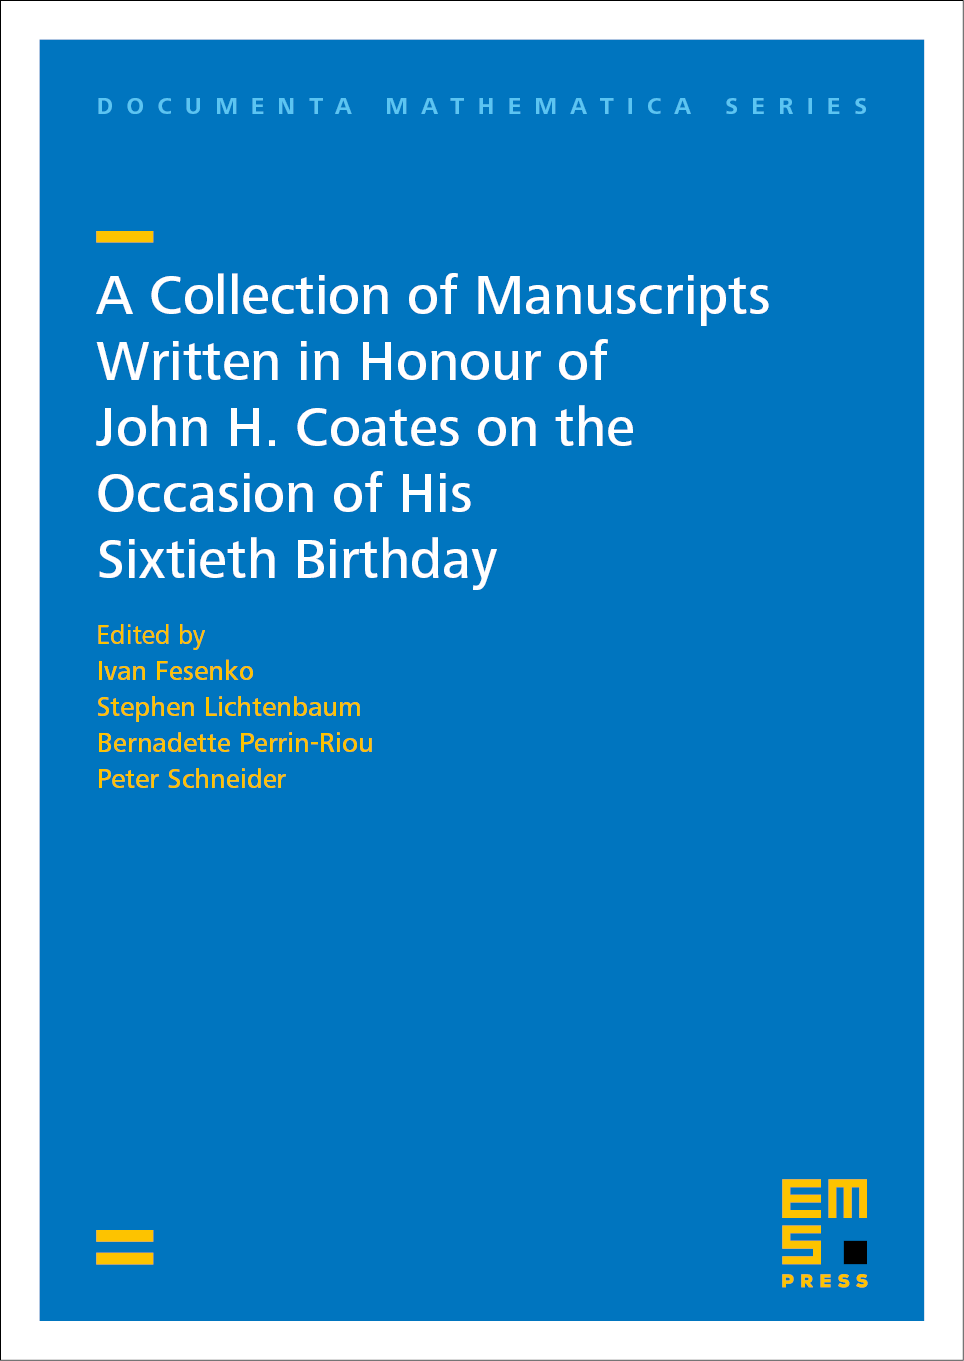 A Collection of Manuscripts Written in Honour of John H. Coates on the Occasion of His Sixtieth Birthday cover